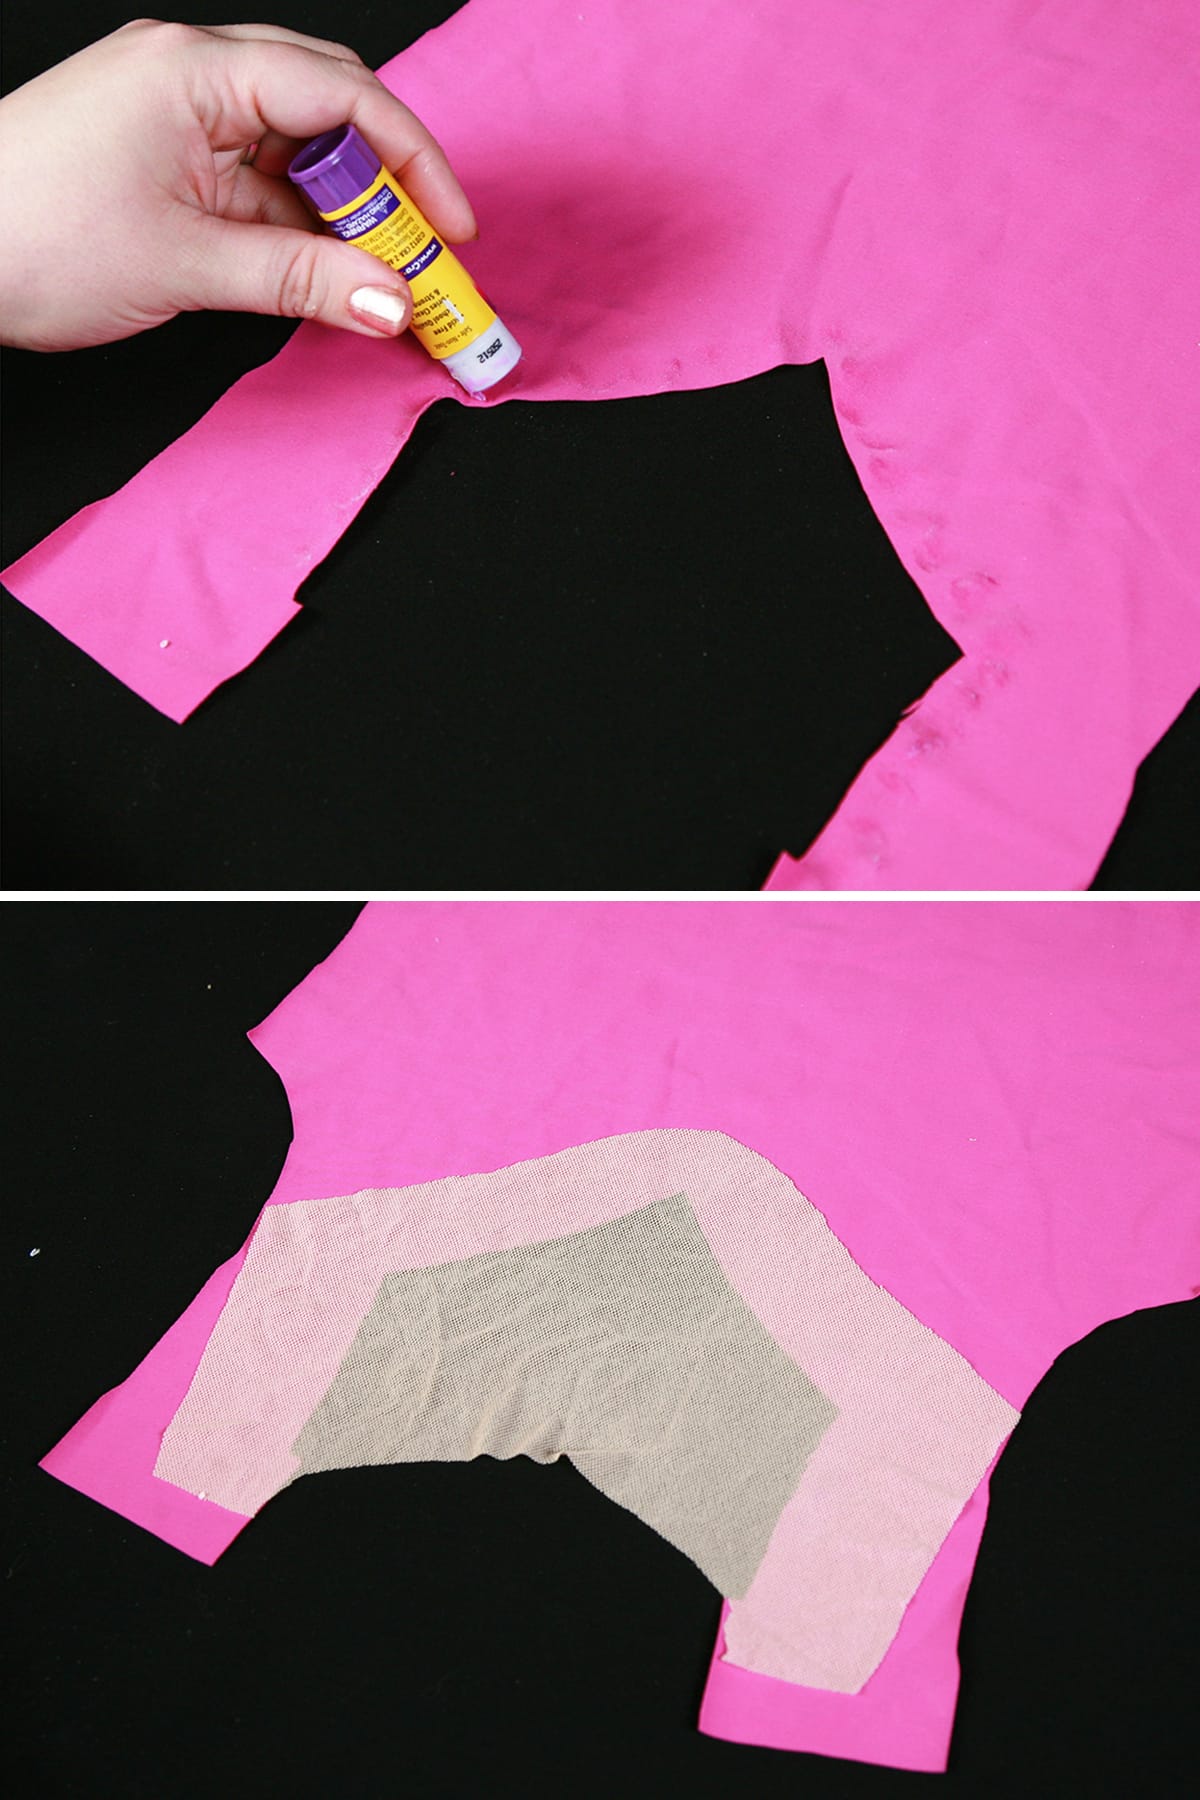 A two part photo showing glue stick being applied to the inner edge of a neckline design, then beige mesh being added on top of the glue.